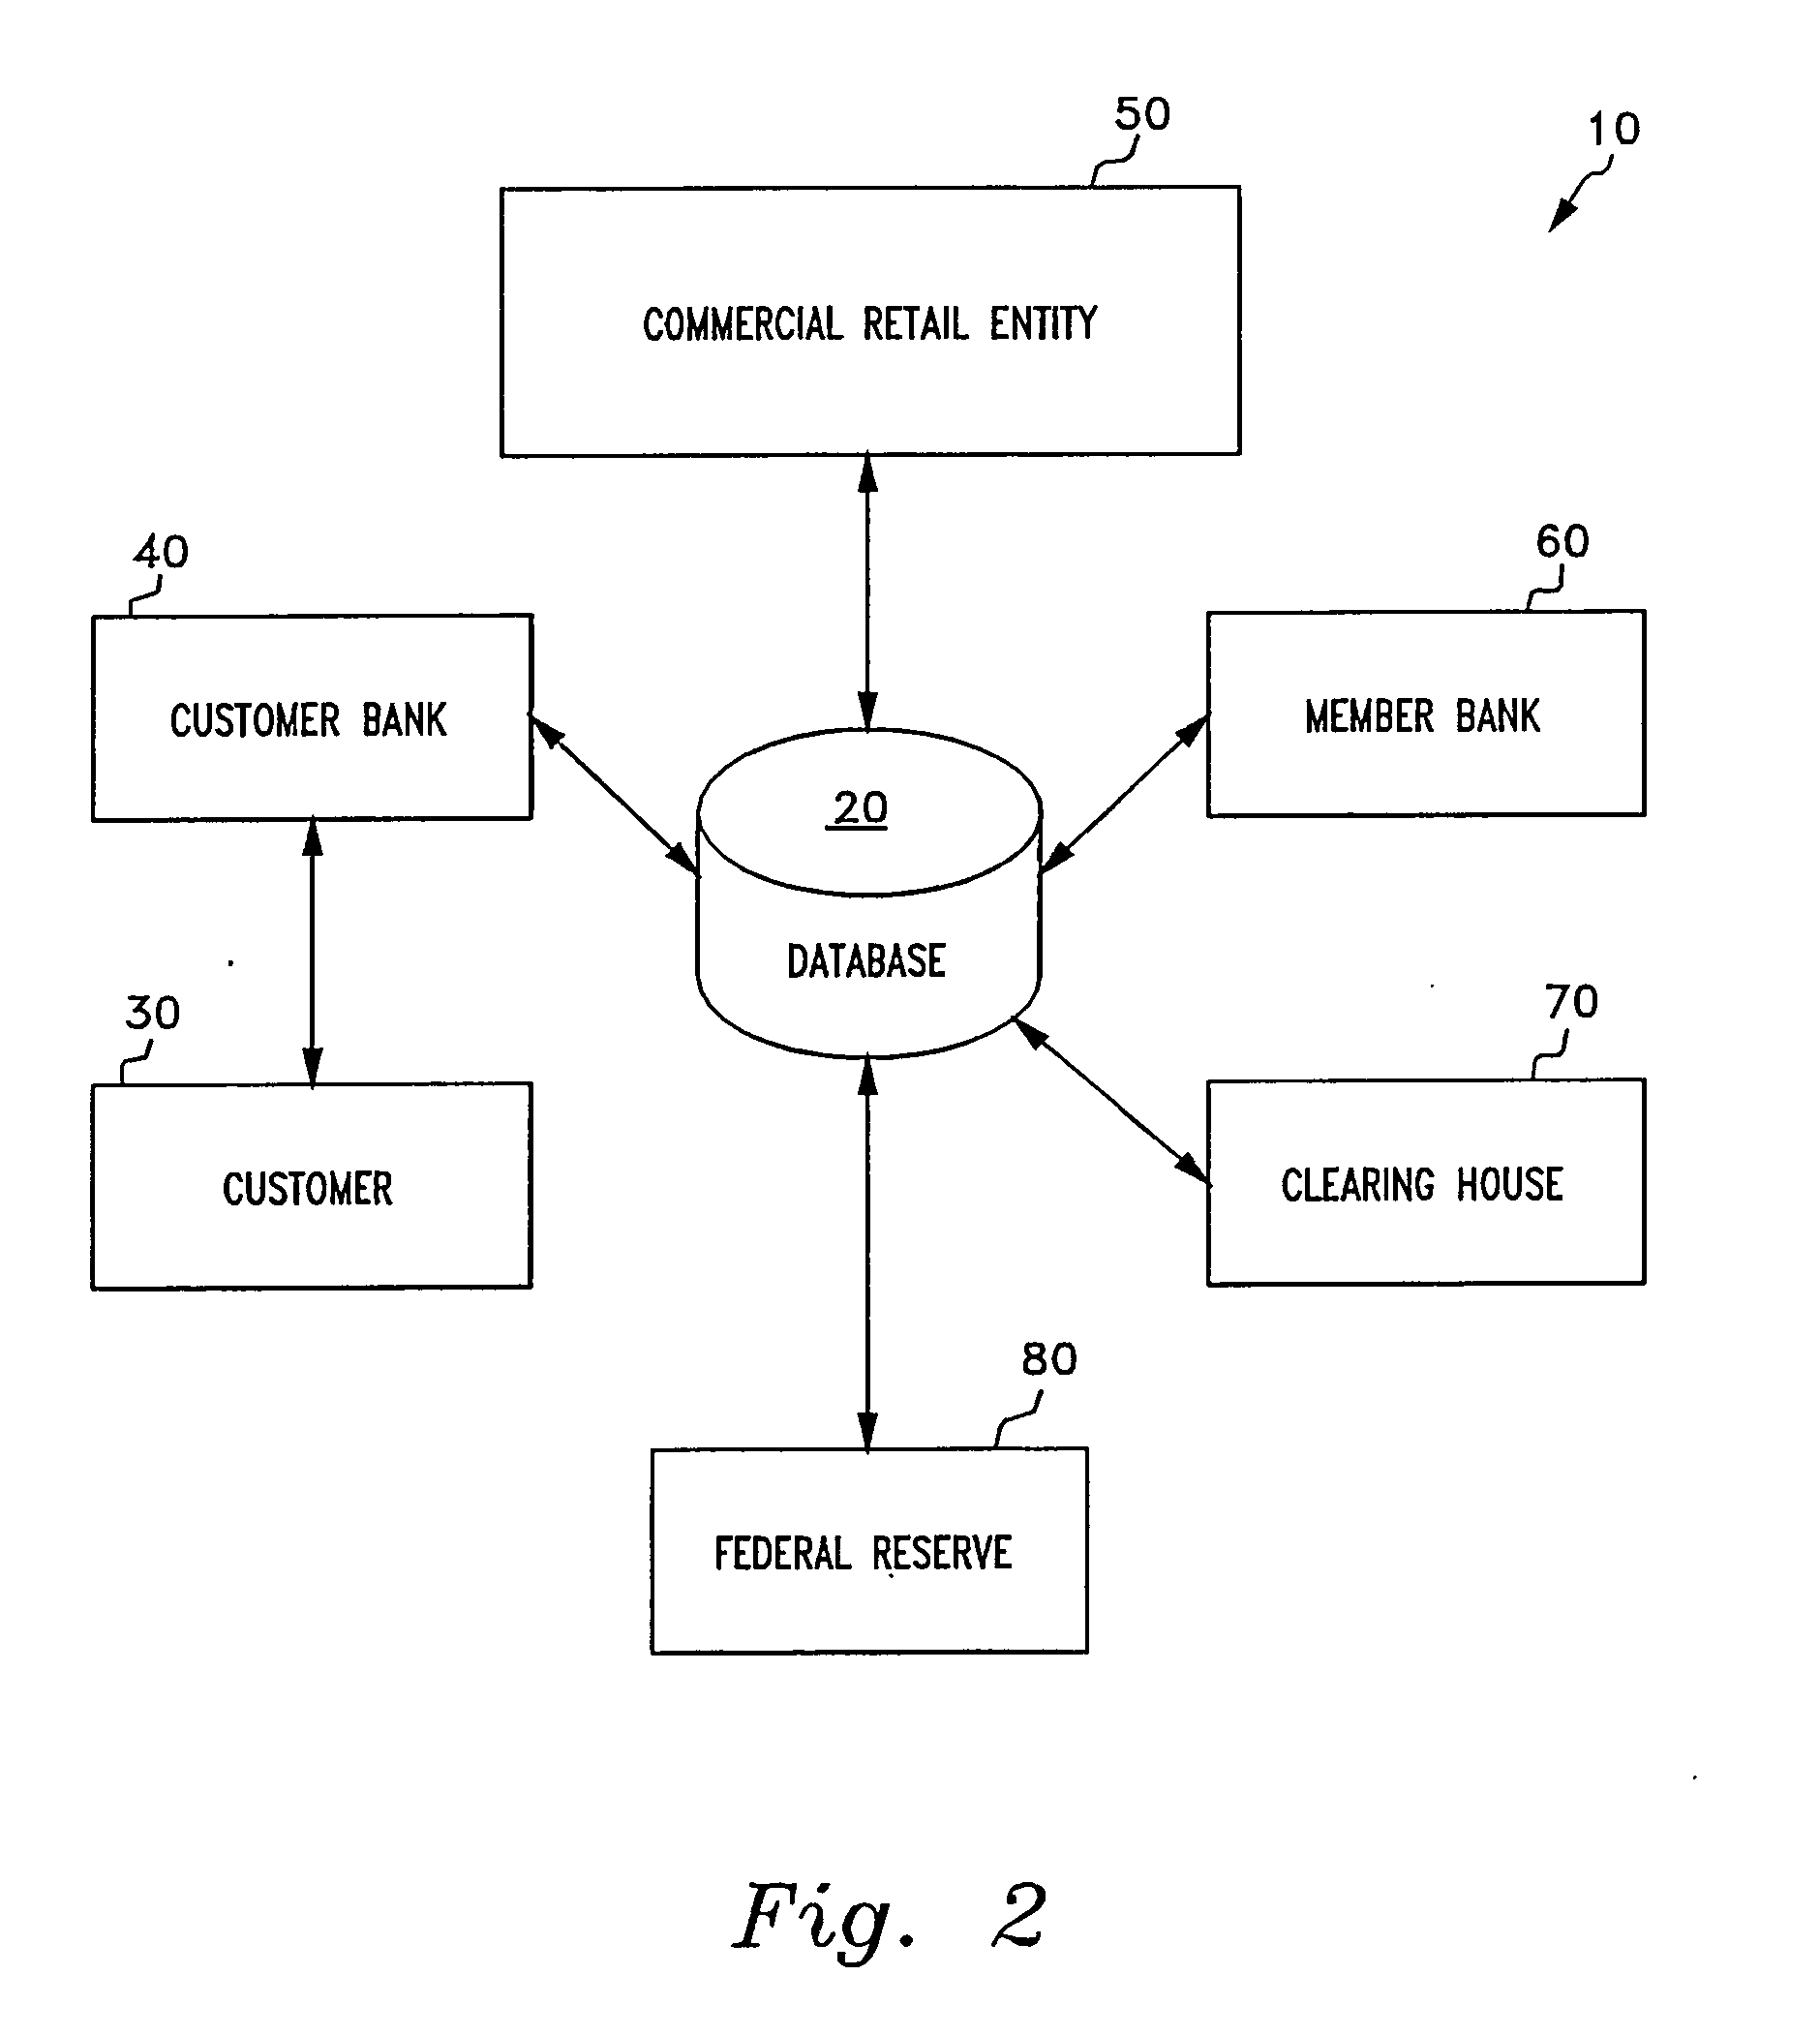 Universal positive pay match, authentication, authorization, settlement and clearing system